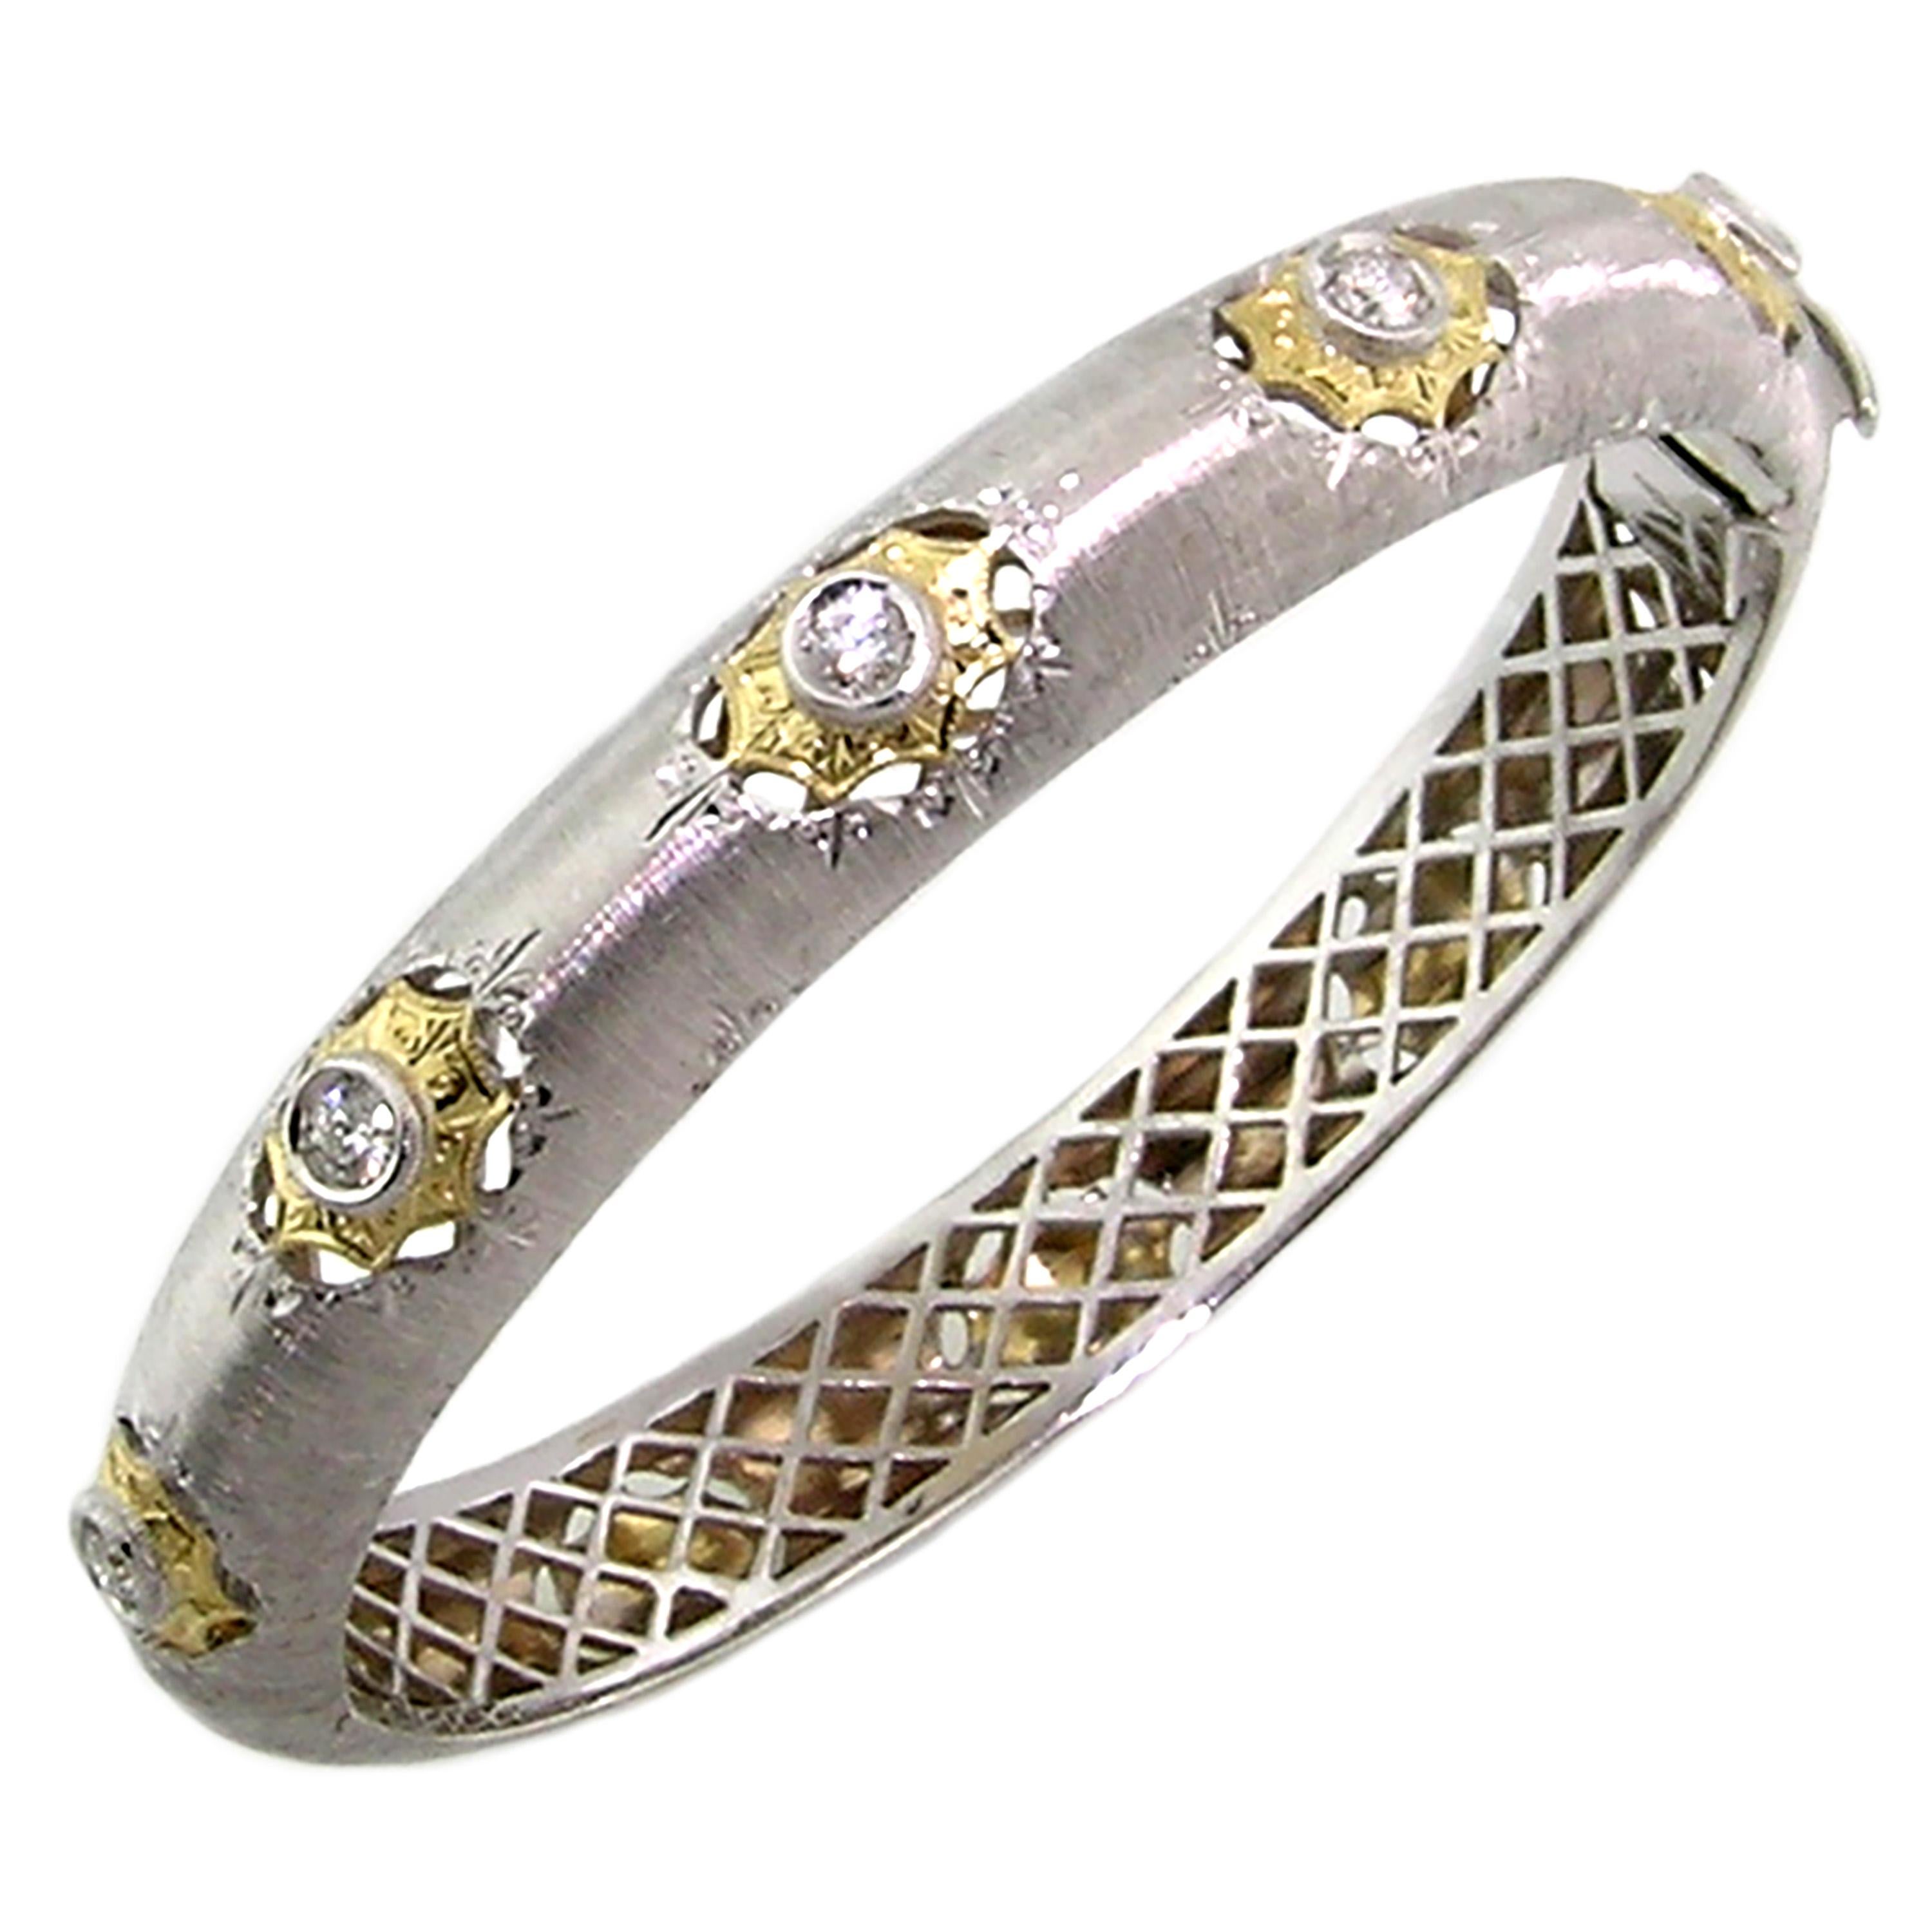 18kt Gold and Diamond Florentine Engraved Bangle, Handmade in Italy